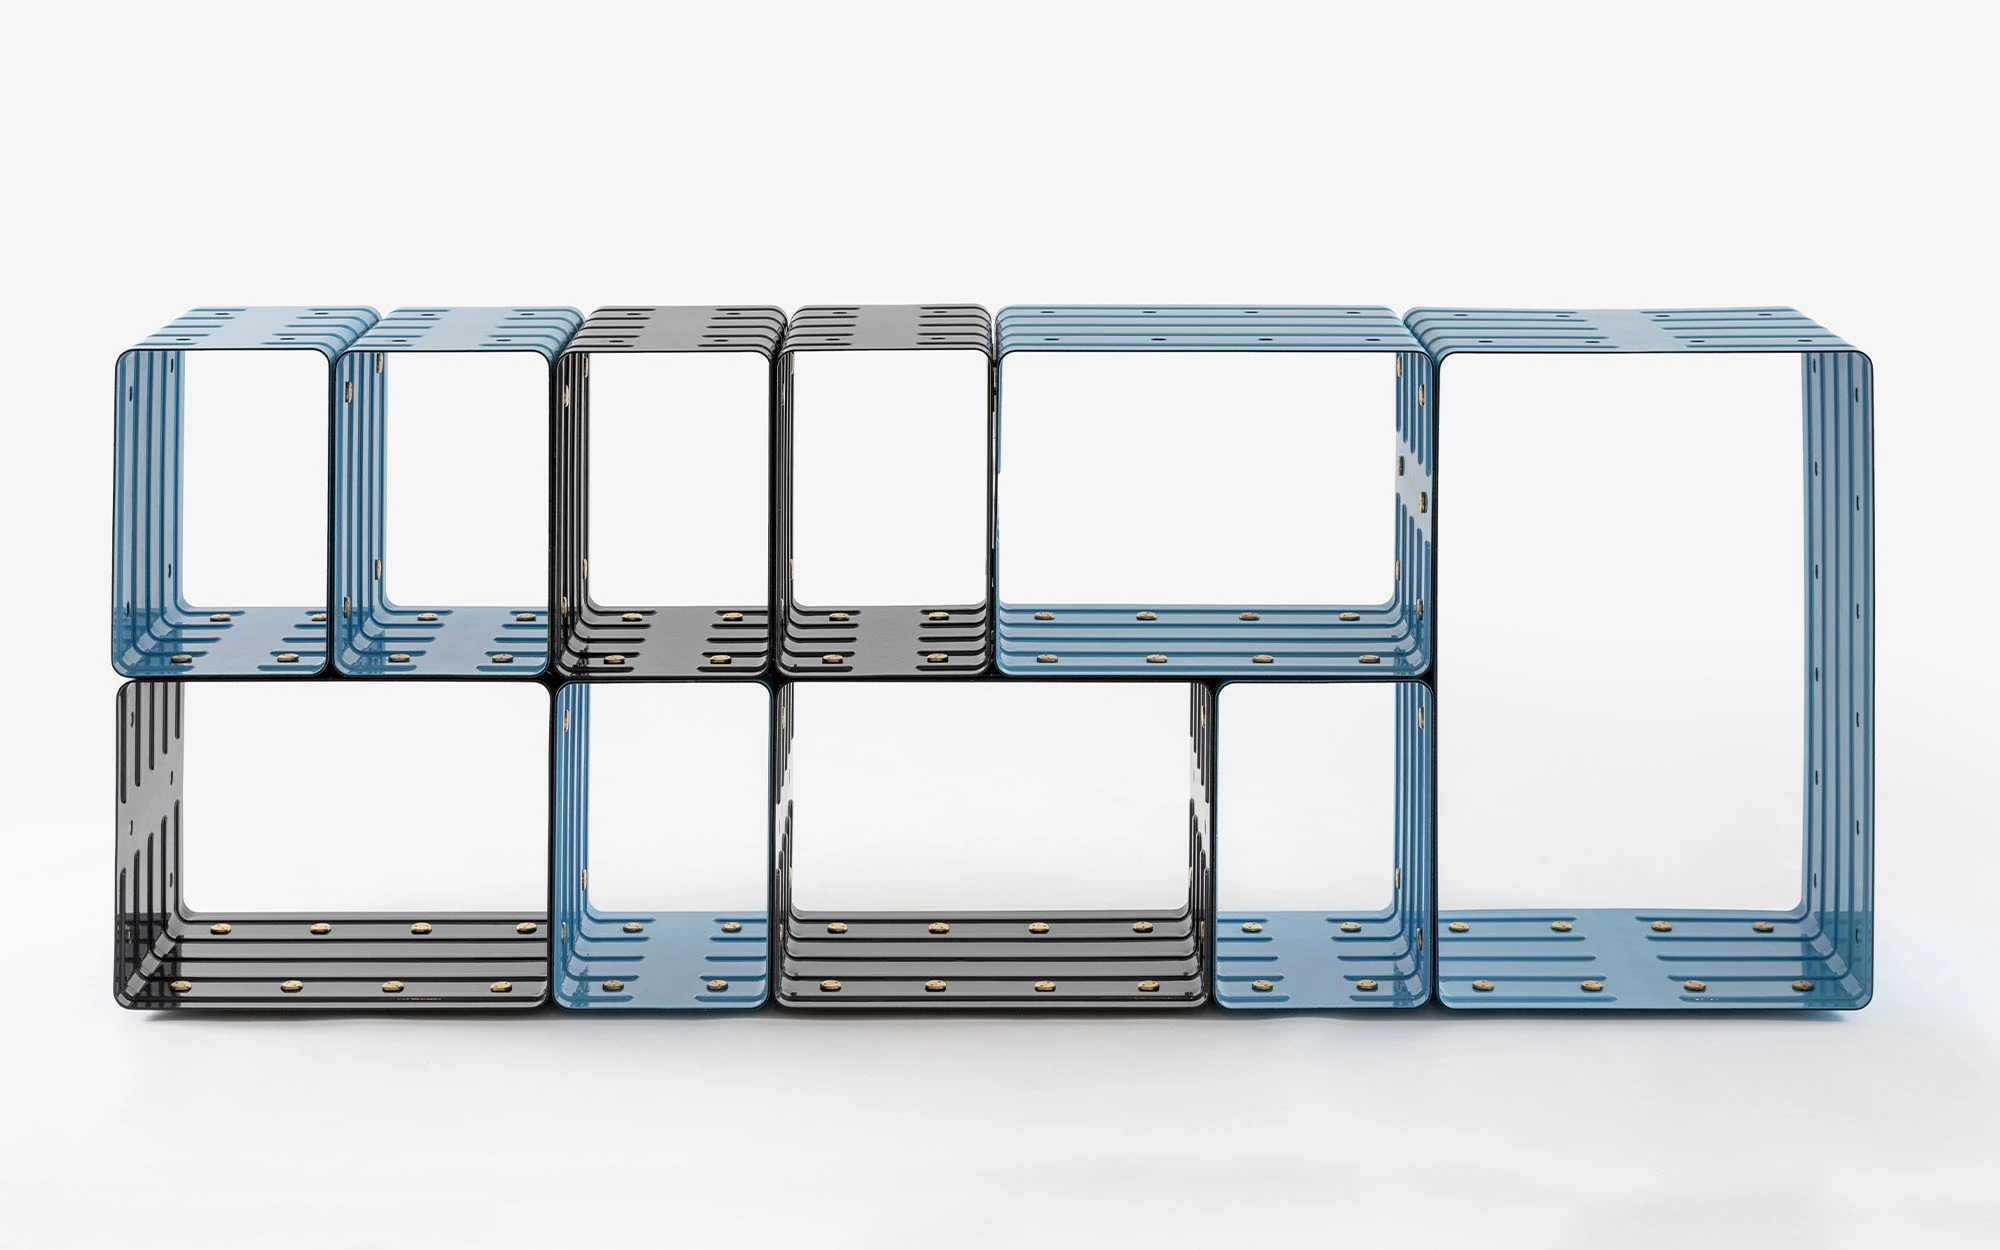 Quobus 1,3,6 two-colored - Marc Newson - Seating - Galerie kreo